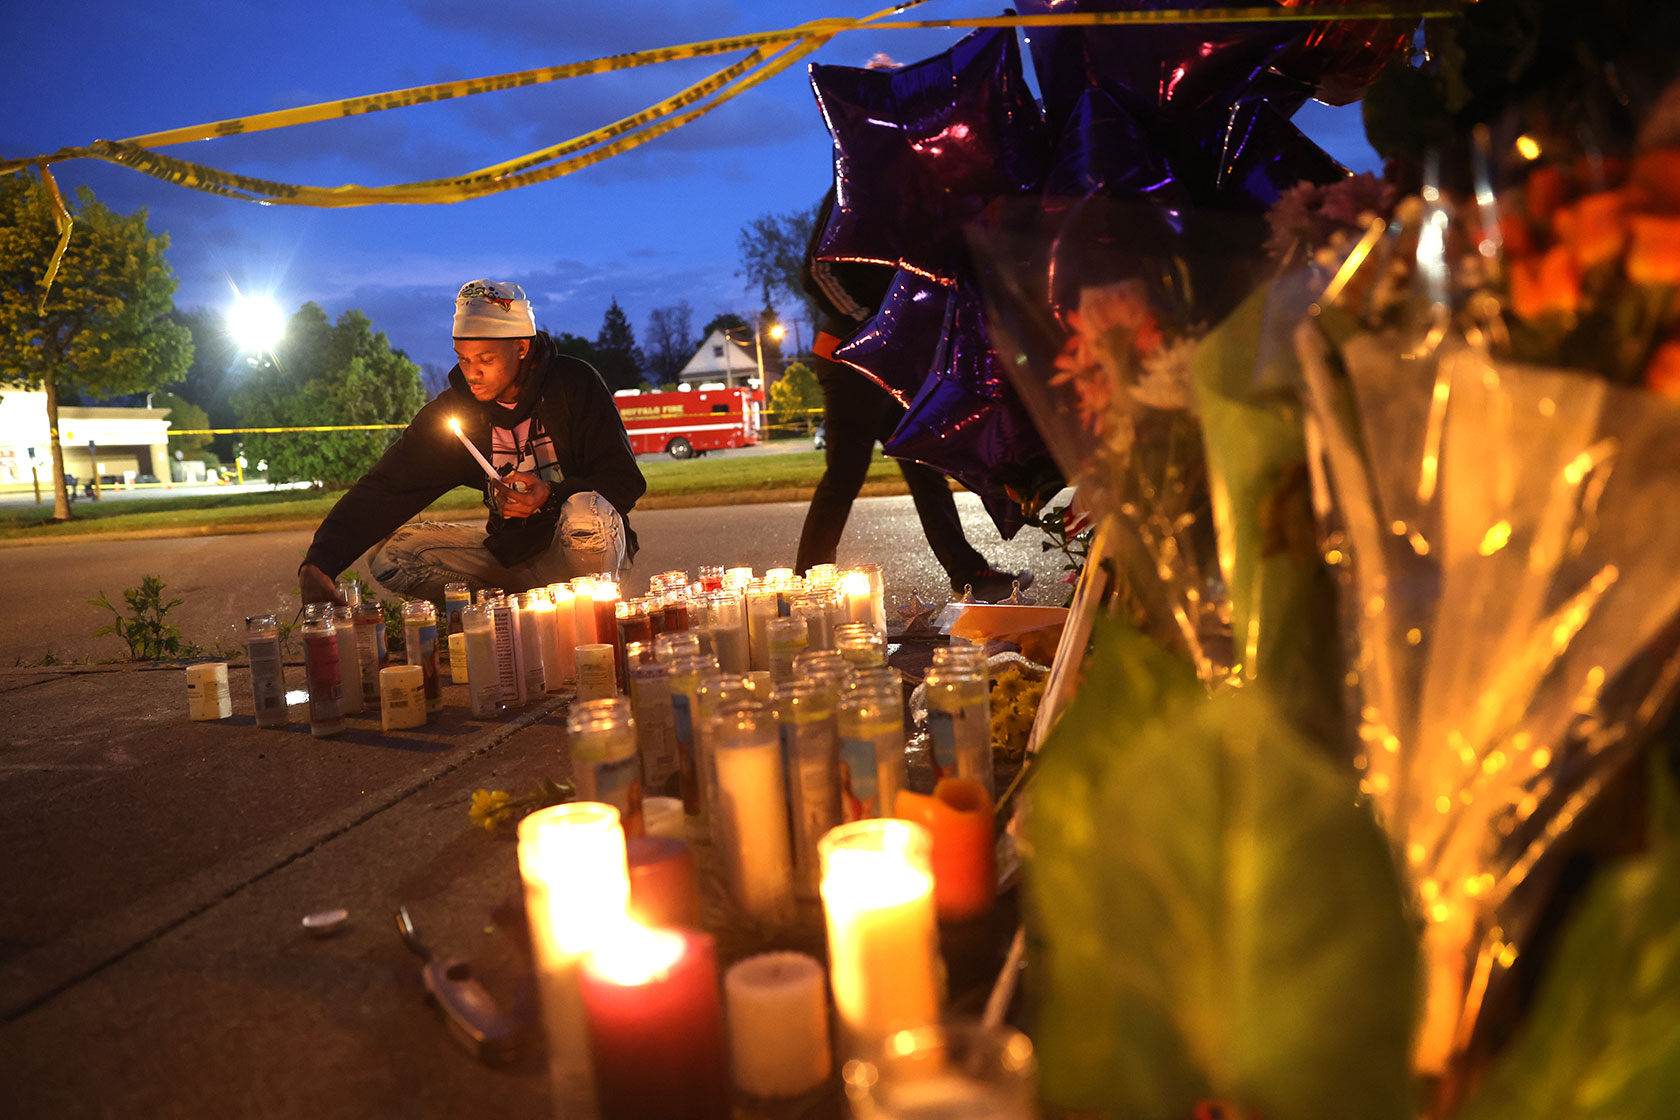 Photo shows a young man lighting a candle in the late evening